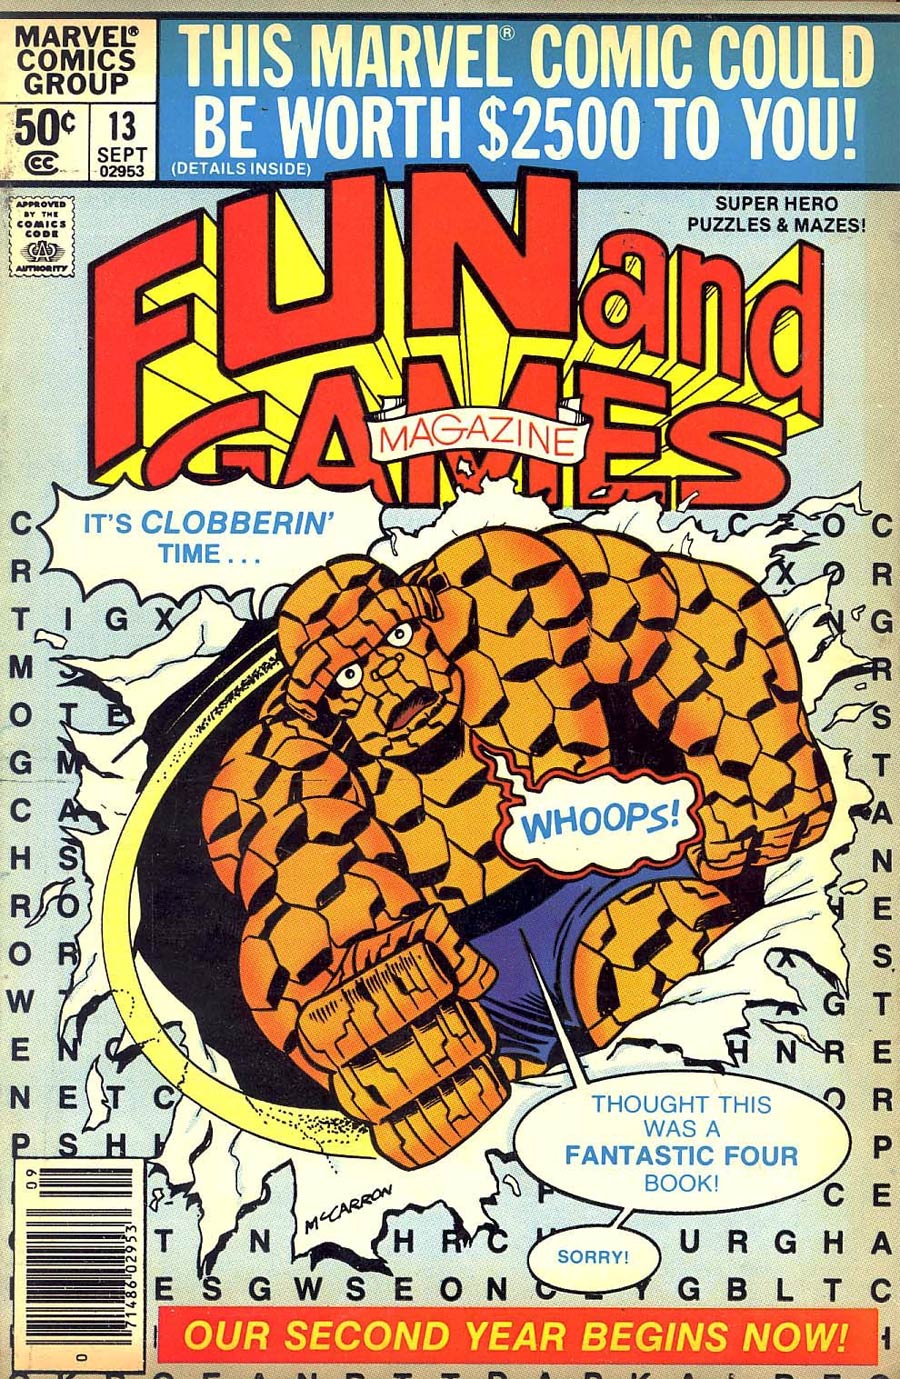 Marvel Fun and Games #13 Cover A Unused